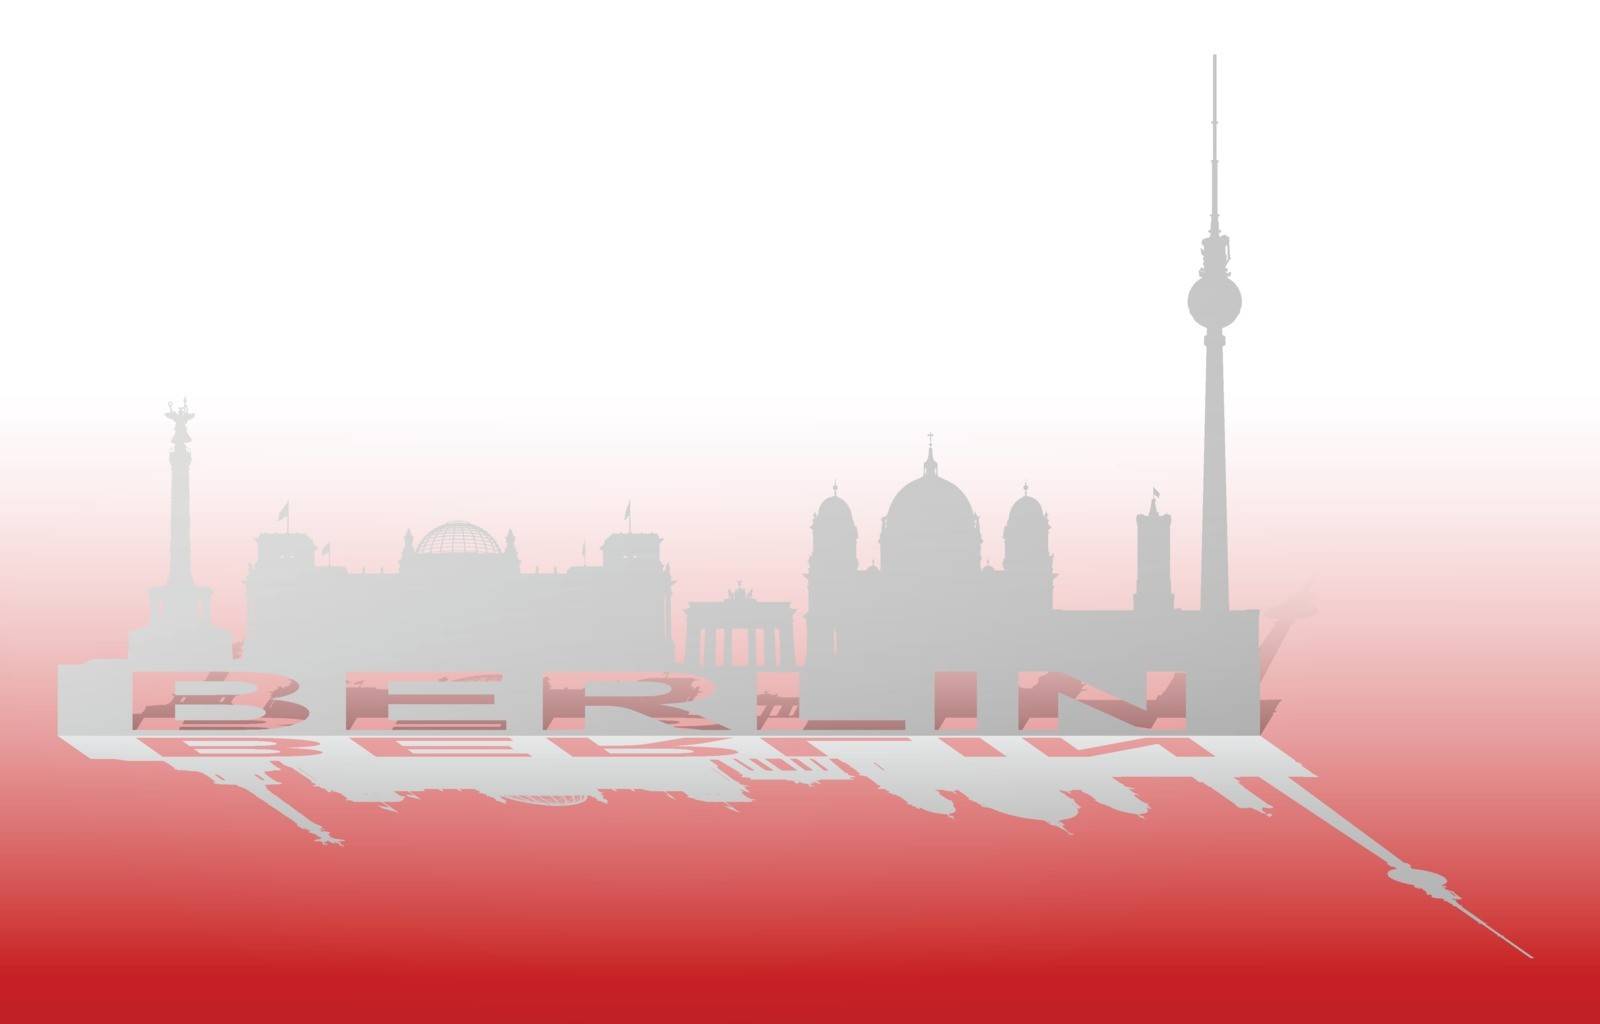 An abstract vector illustration of the Cityscape of Berlin.